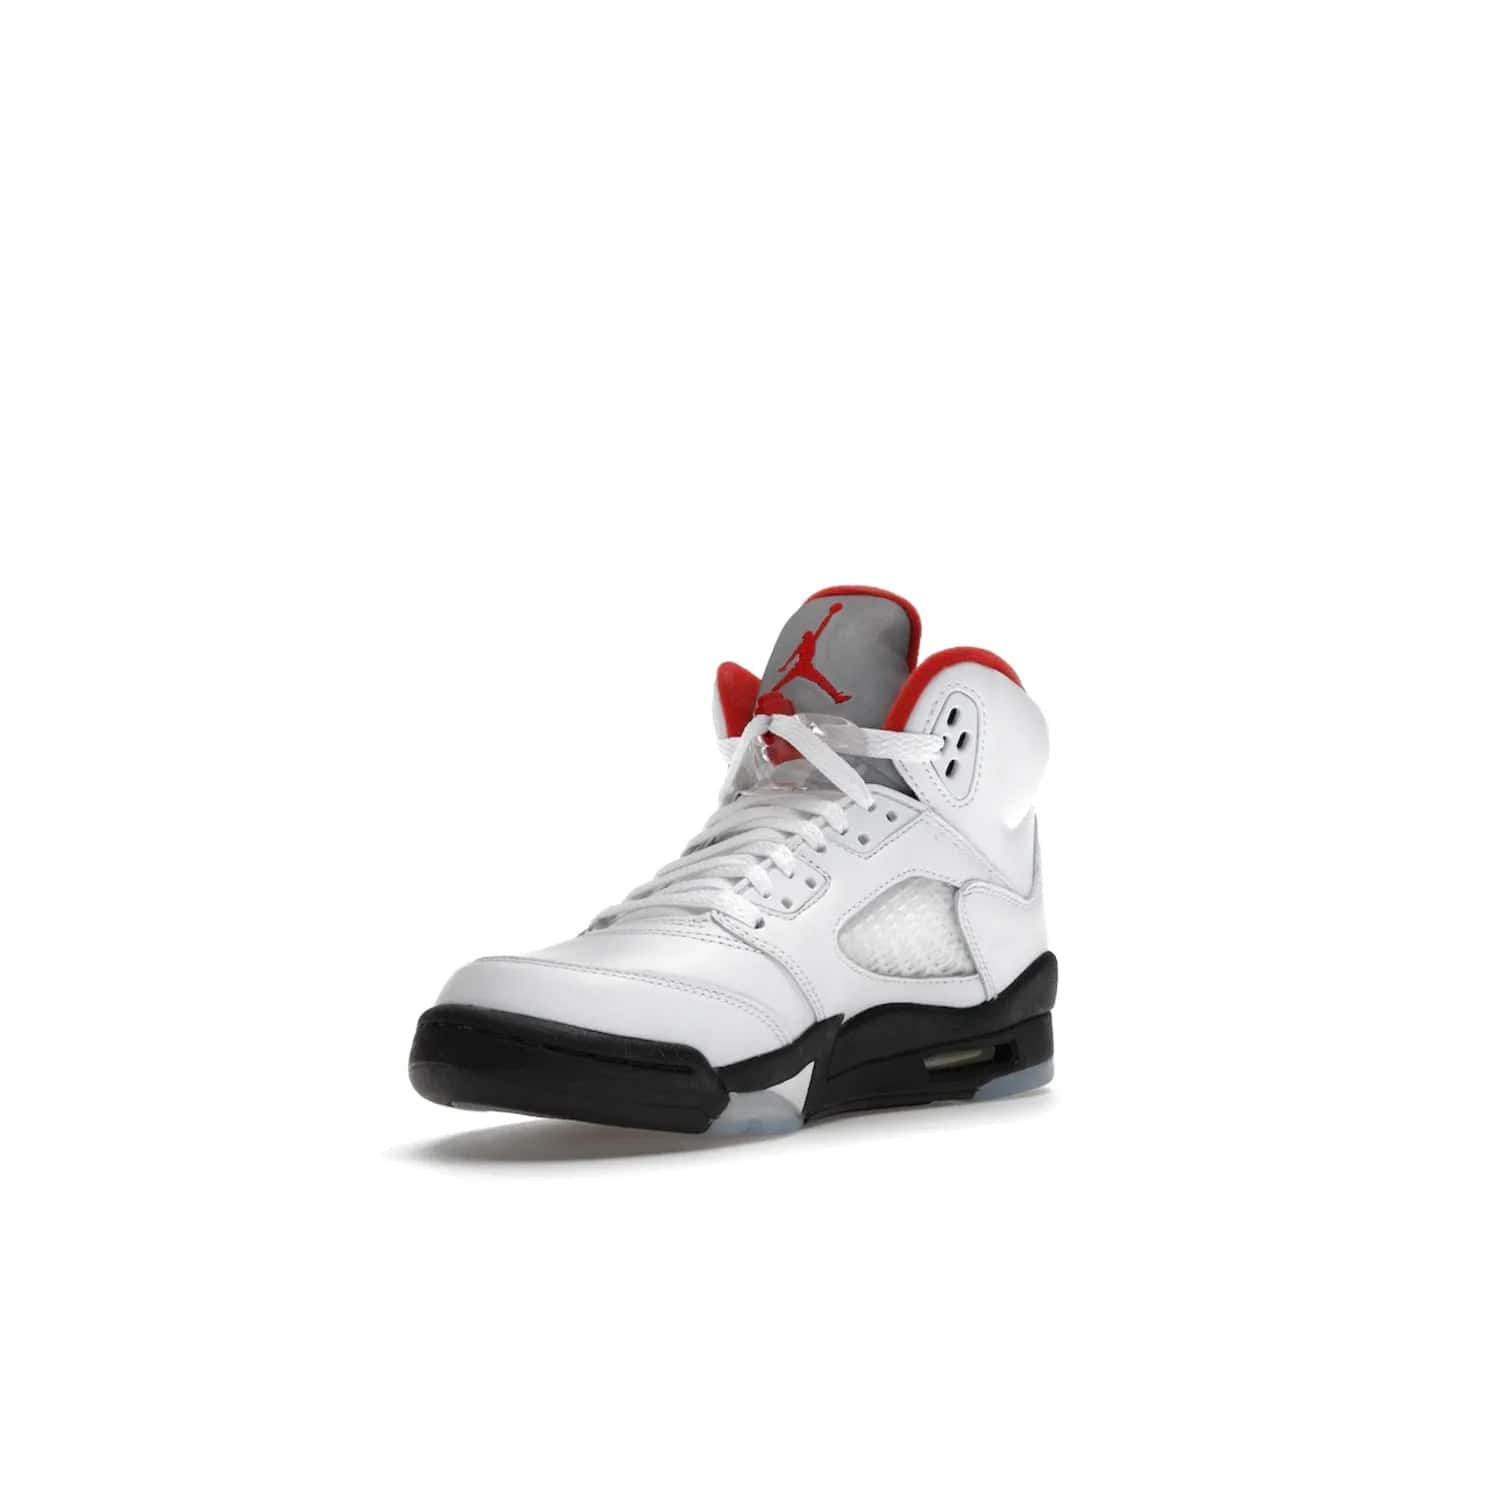 Jordan 5 Retro Fire Red Silver Tongue (2020) (GS) - Image 14 - Only at www.BallersClubKickz.com - A stylish option for any grade schooler. The Air Jordan 5 Retro Fire Red Silver Tongue 2020 GS features a combination of four hues, premium white leather, a clear mesh mid-upper and a reflective silver tongue. An icy translucent blue outsole completes the look. Available on May 2, $150.